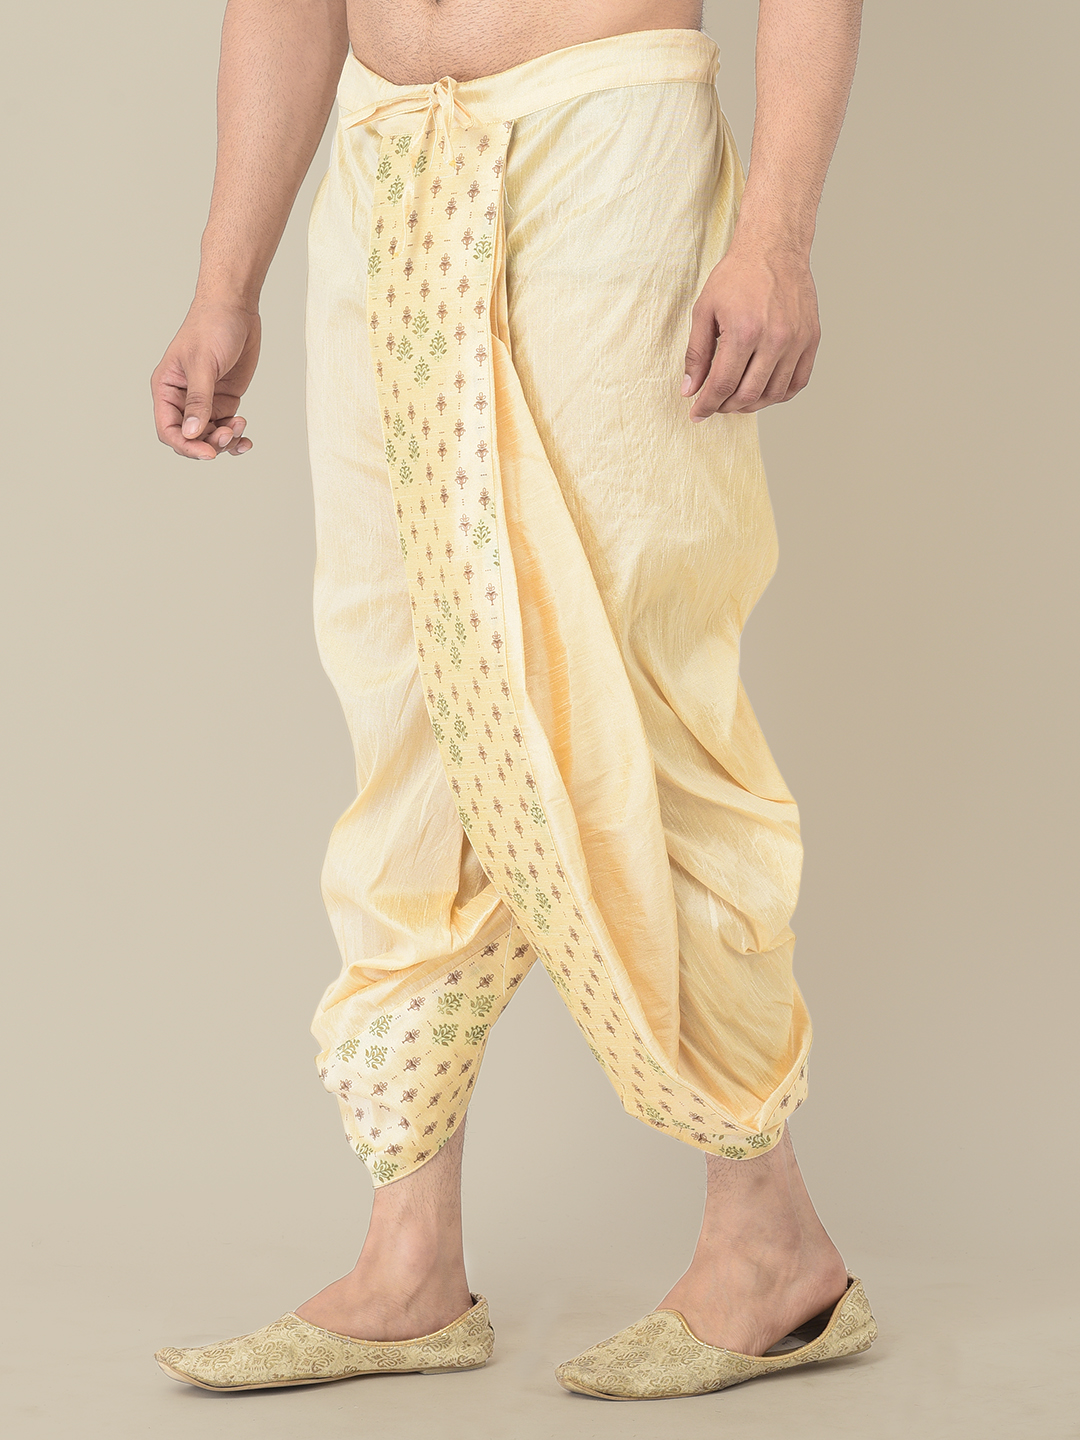 Buy Women Readymade Printed Dhoti Lace Rayon Fabric Loose Fit Dhoti Pant/ salwar/ Size 26 to 36 Online in India - Etsy